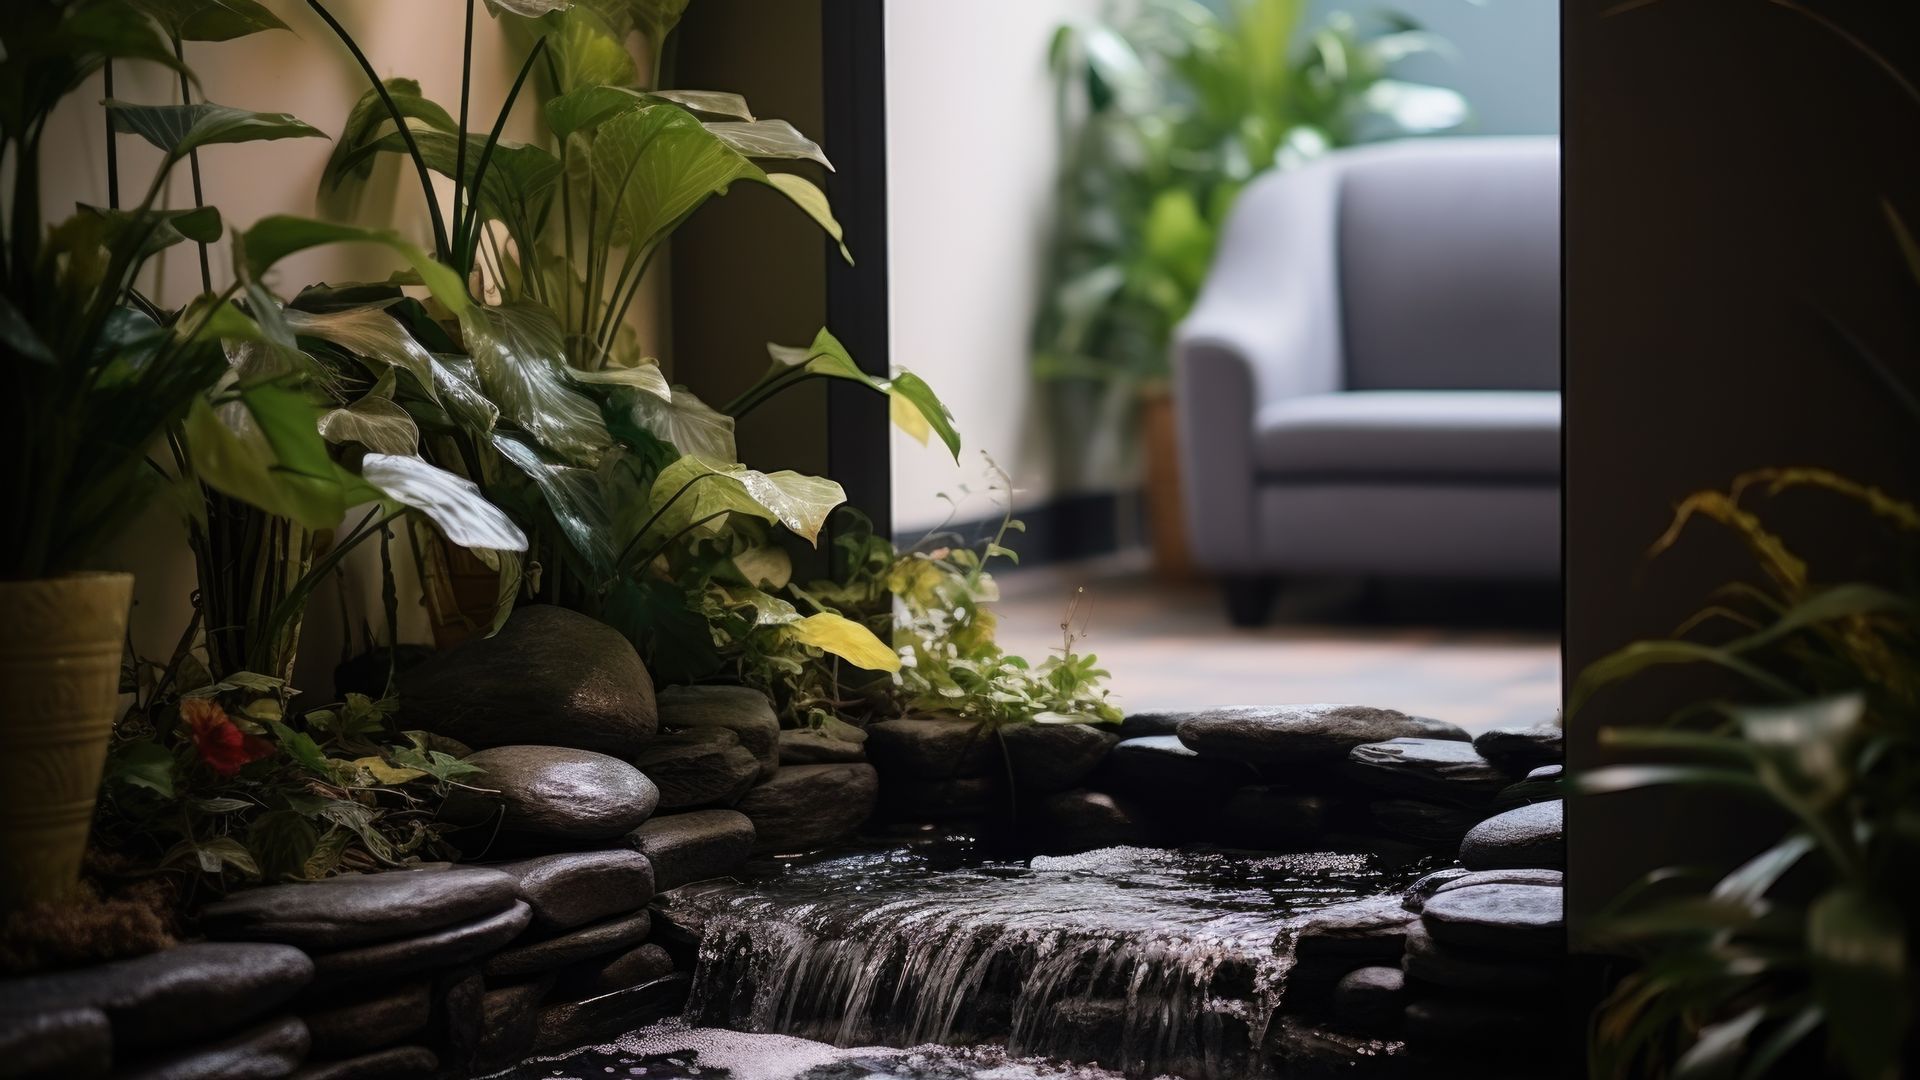 a close up shot of a water feature in an office. it resembles a river with water flowing down two separate layers. on the side of the river are plants and flowers. in the background, there is a sofa. 